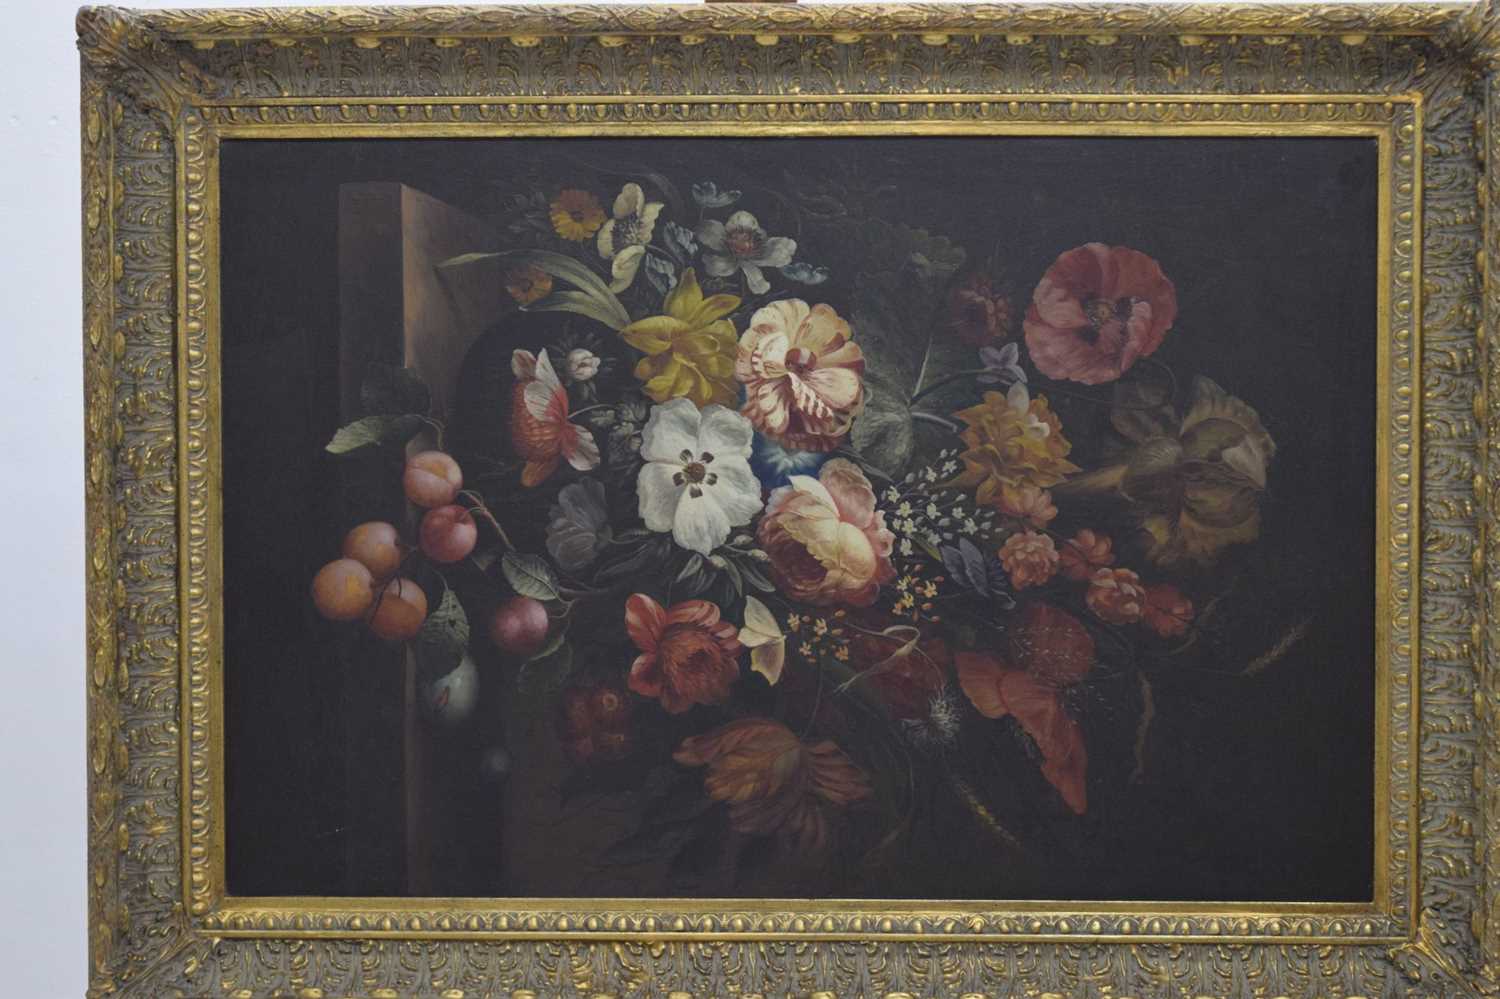 20th century Continental School - Still life with flowers, in 17th century taste - Image 2 of 10